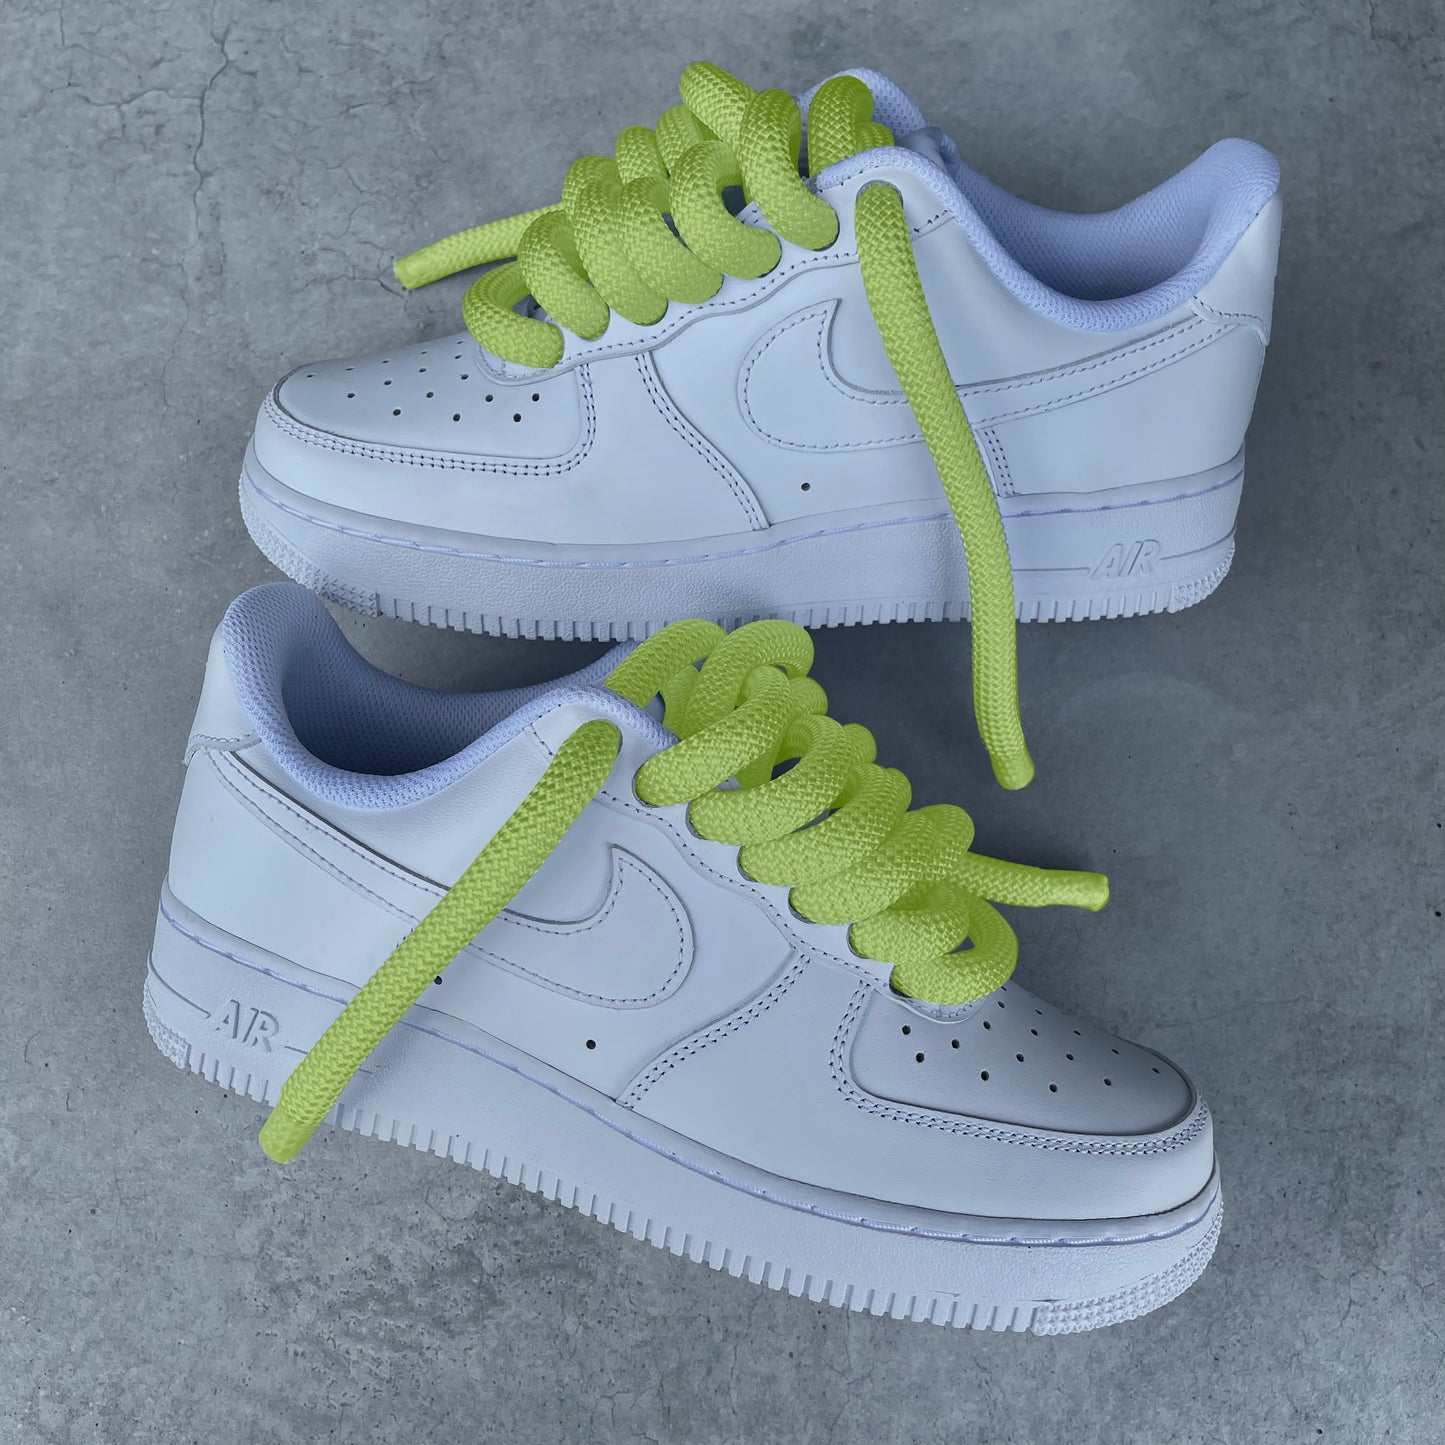 Custom AIR FORCE 1 - Rope laces 2.0 (lime green)